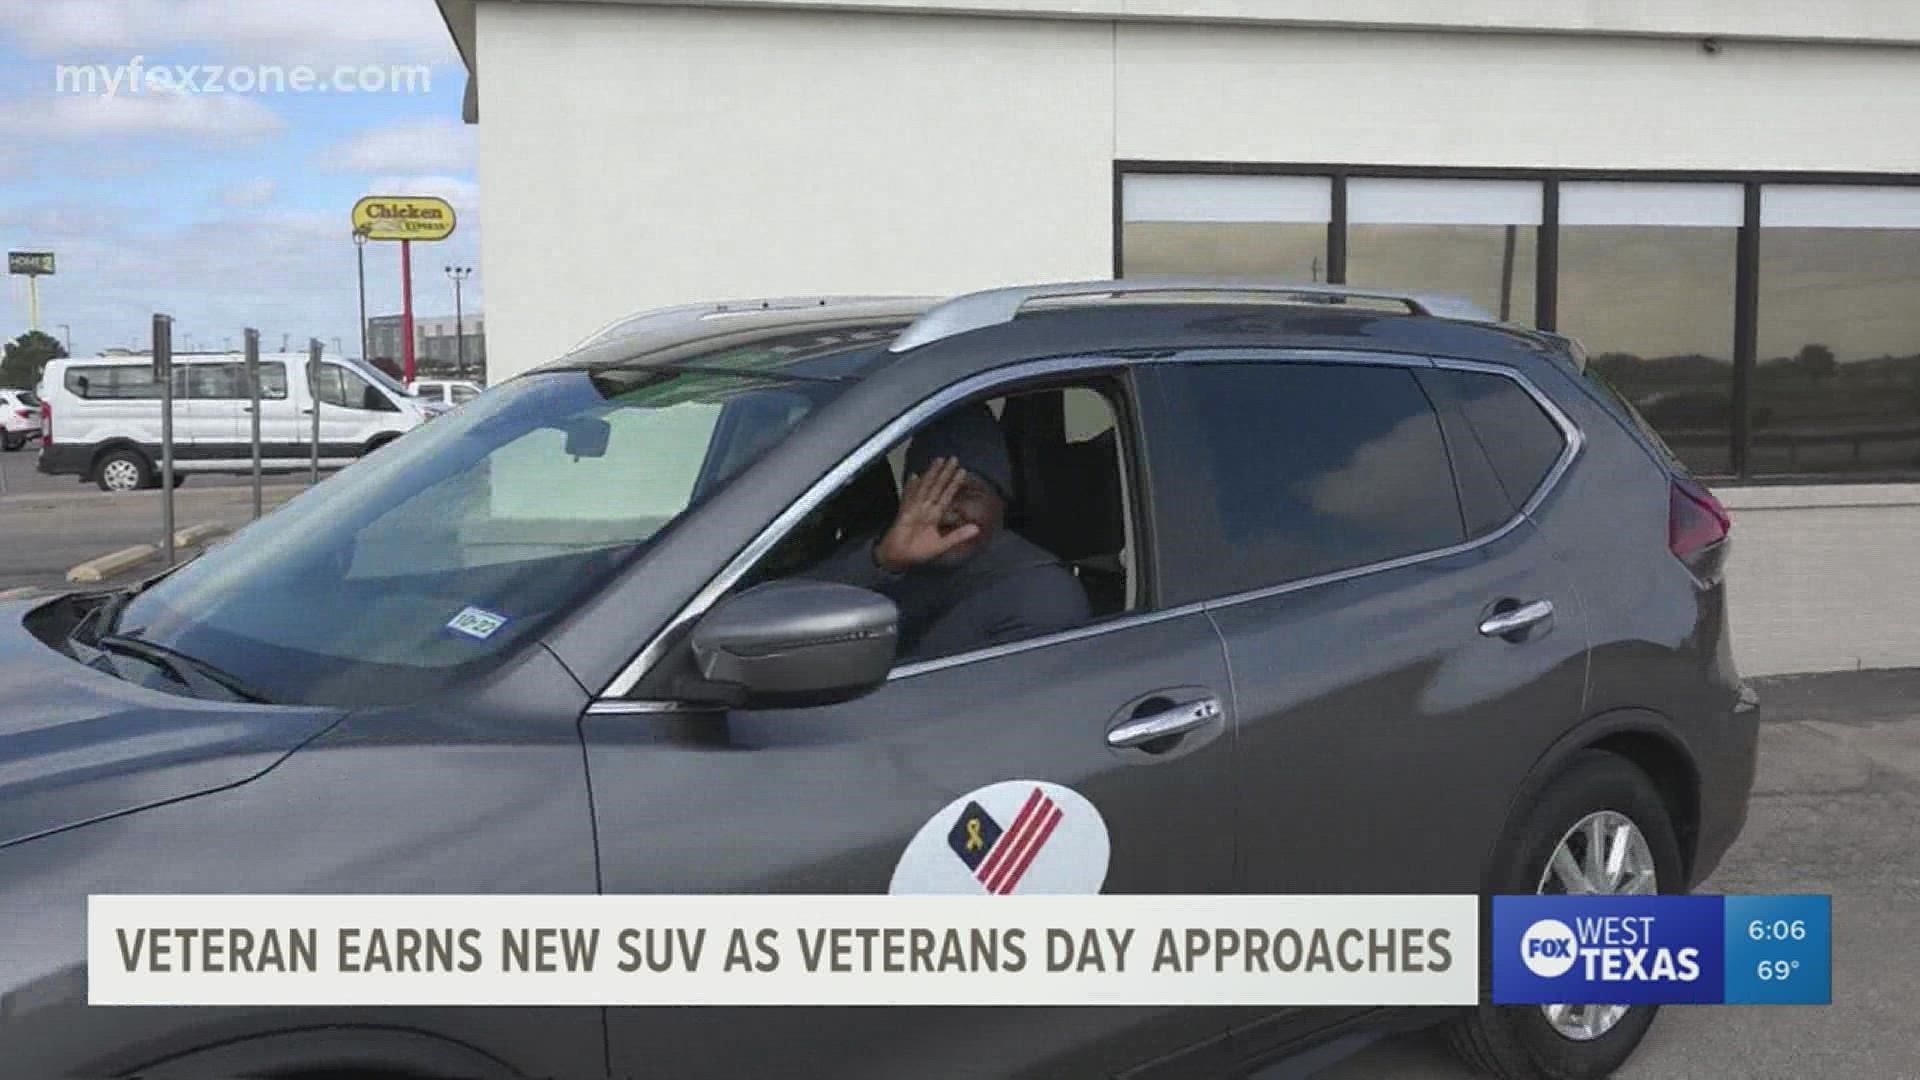 After struggling to get around, a combat engineer veteran earned new wheels just in time for Veterans Day.